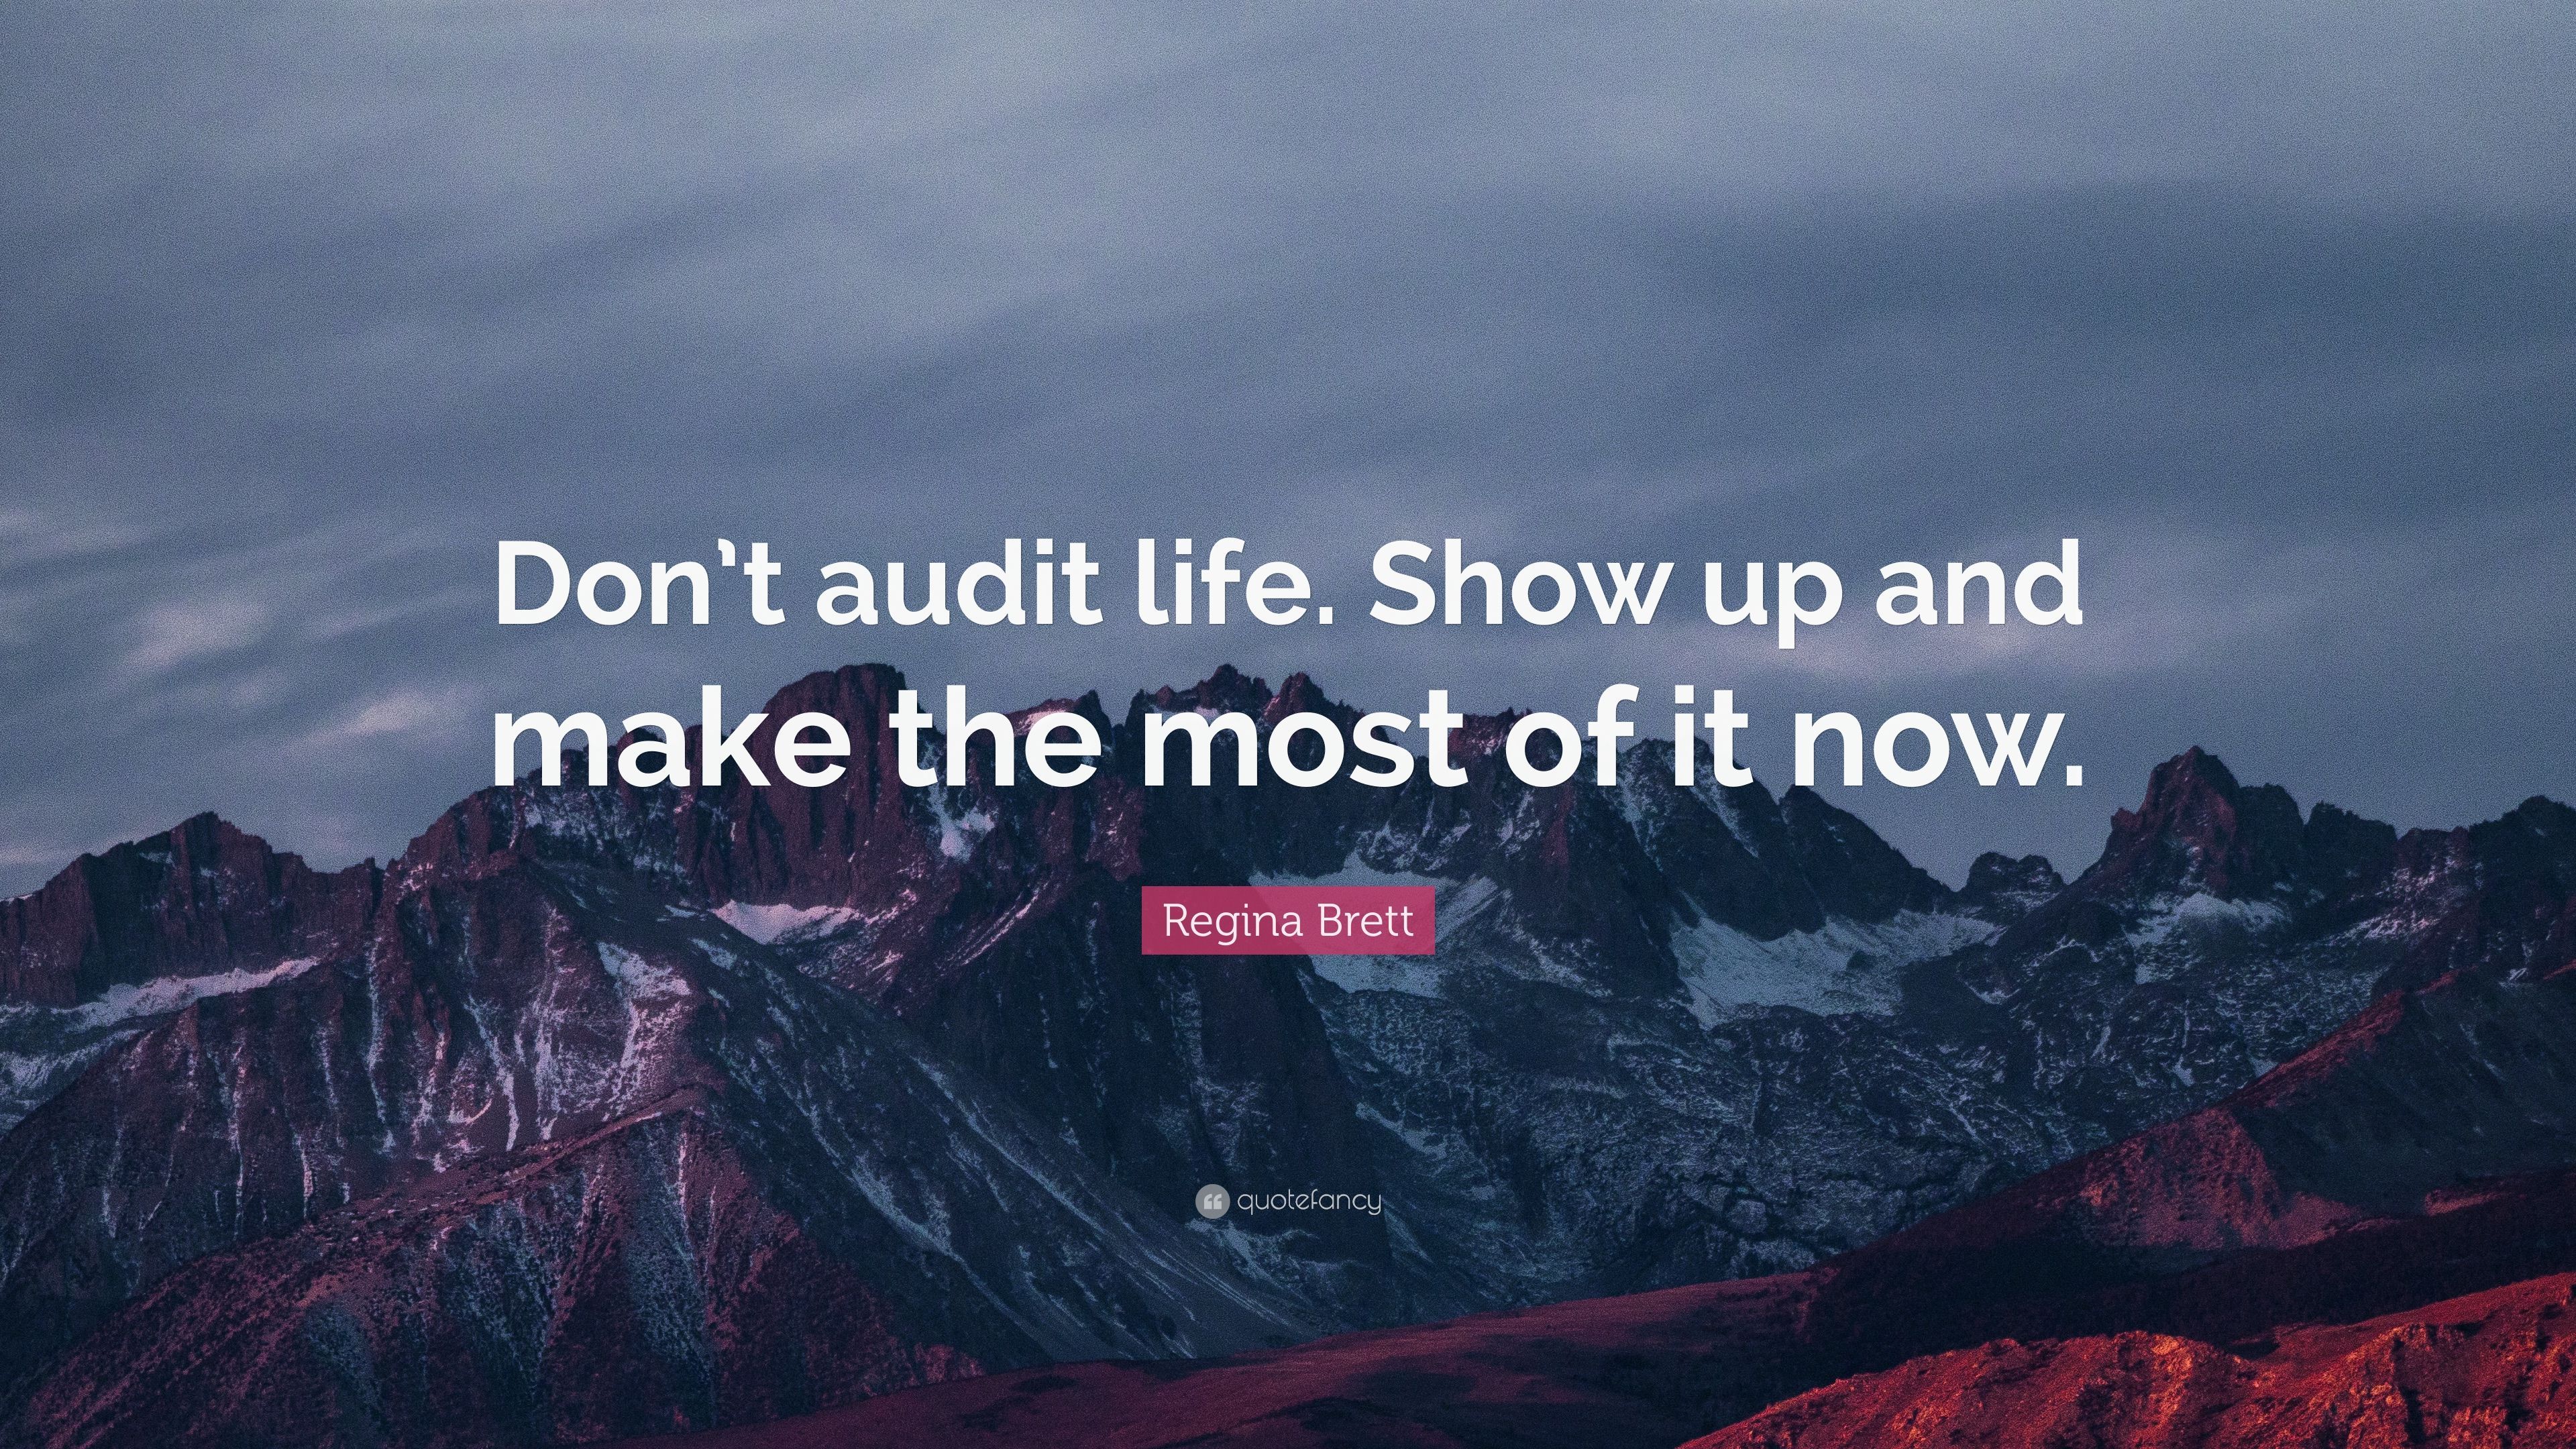 Regina Brett Quote: “Don't audit life. Show up and make the most of it now.” (7 wallpaper)